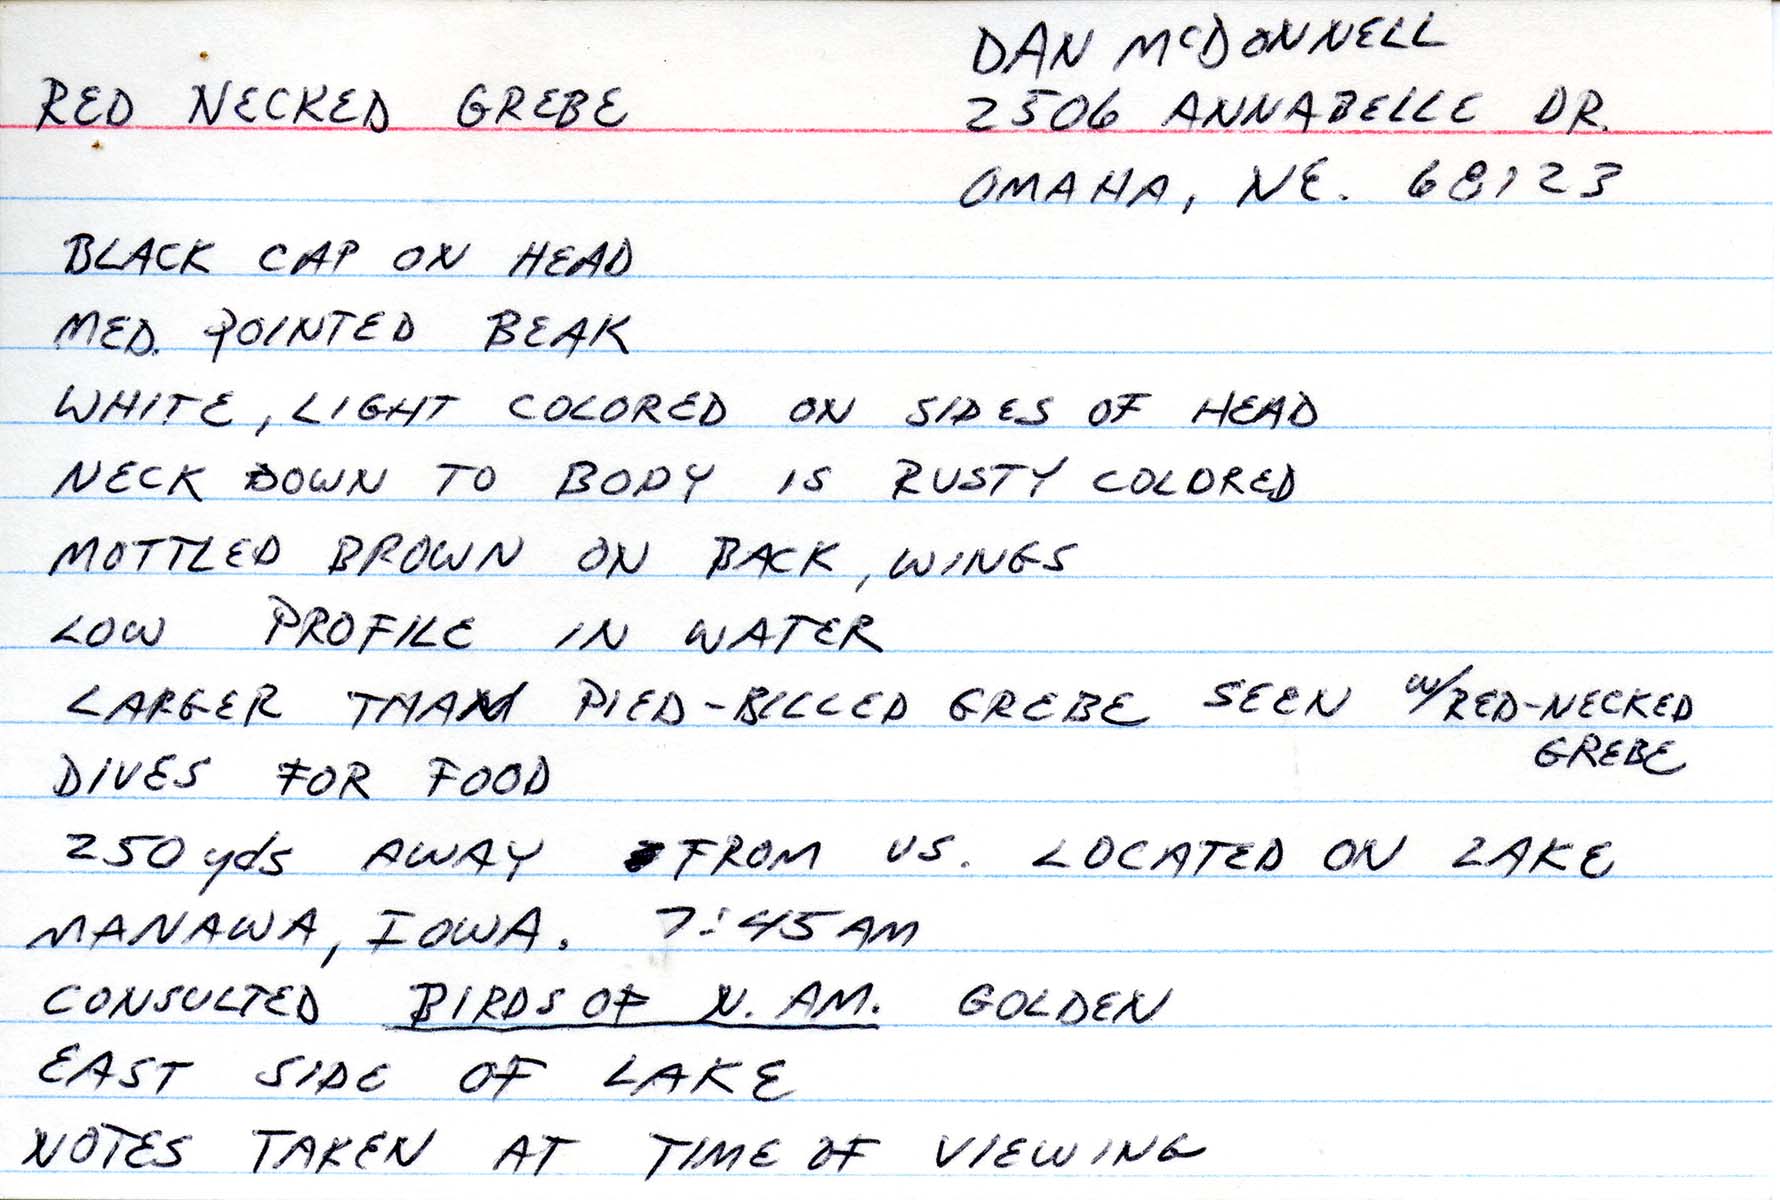 Field notes contributed by Dan McDonnell, spring 1988